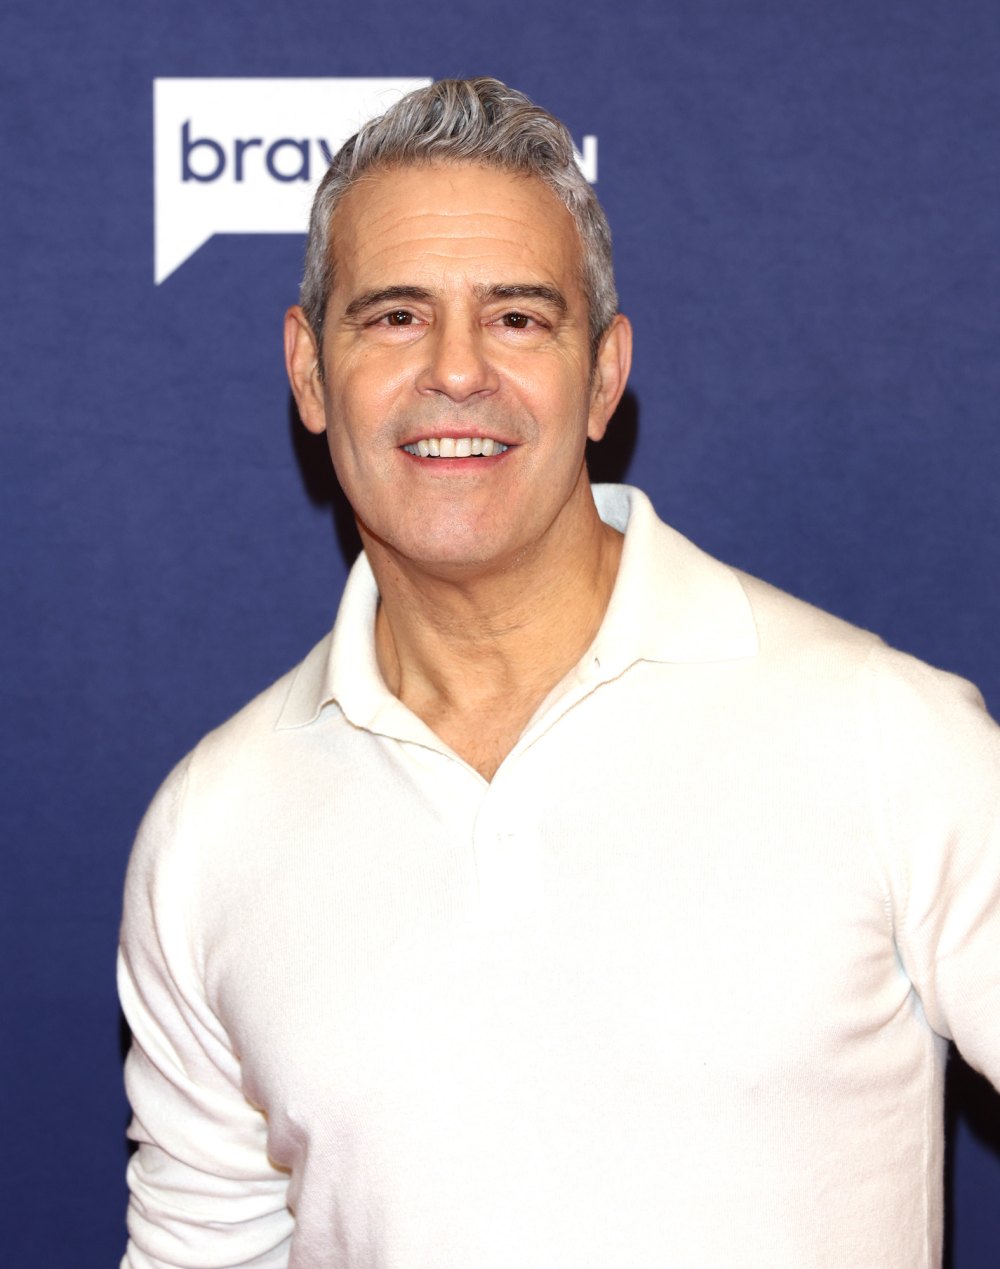 Andy Cohen Says Getting Burned Helped Him Learn to Scale Back Questions During Interviews